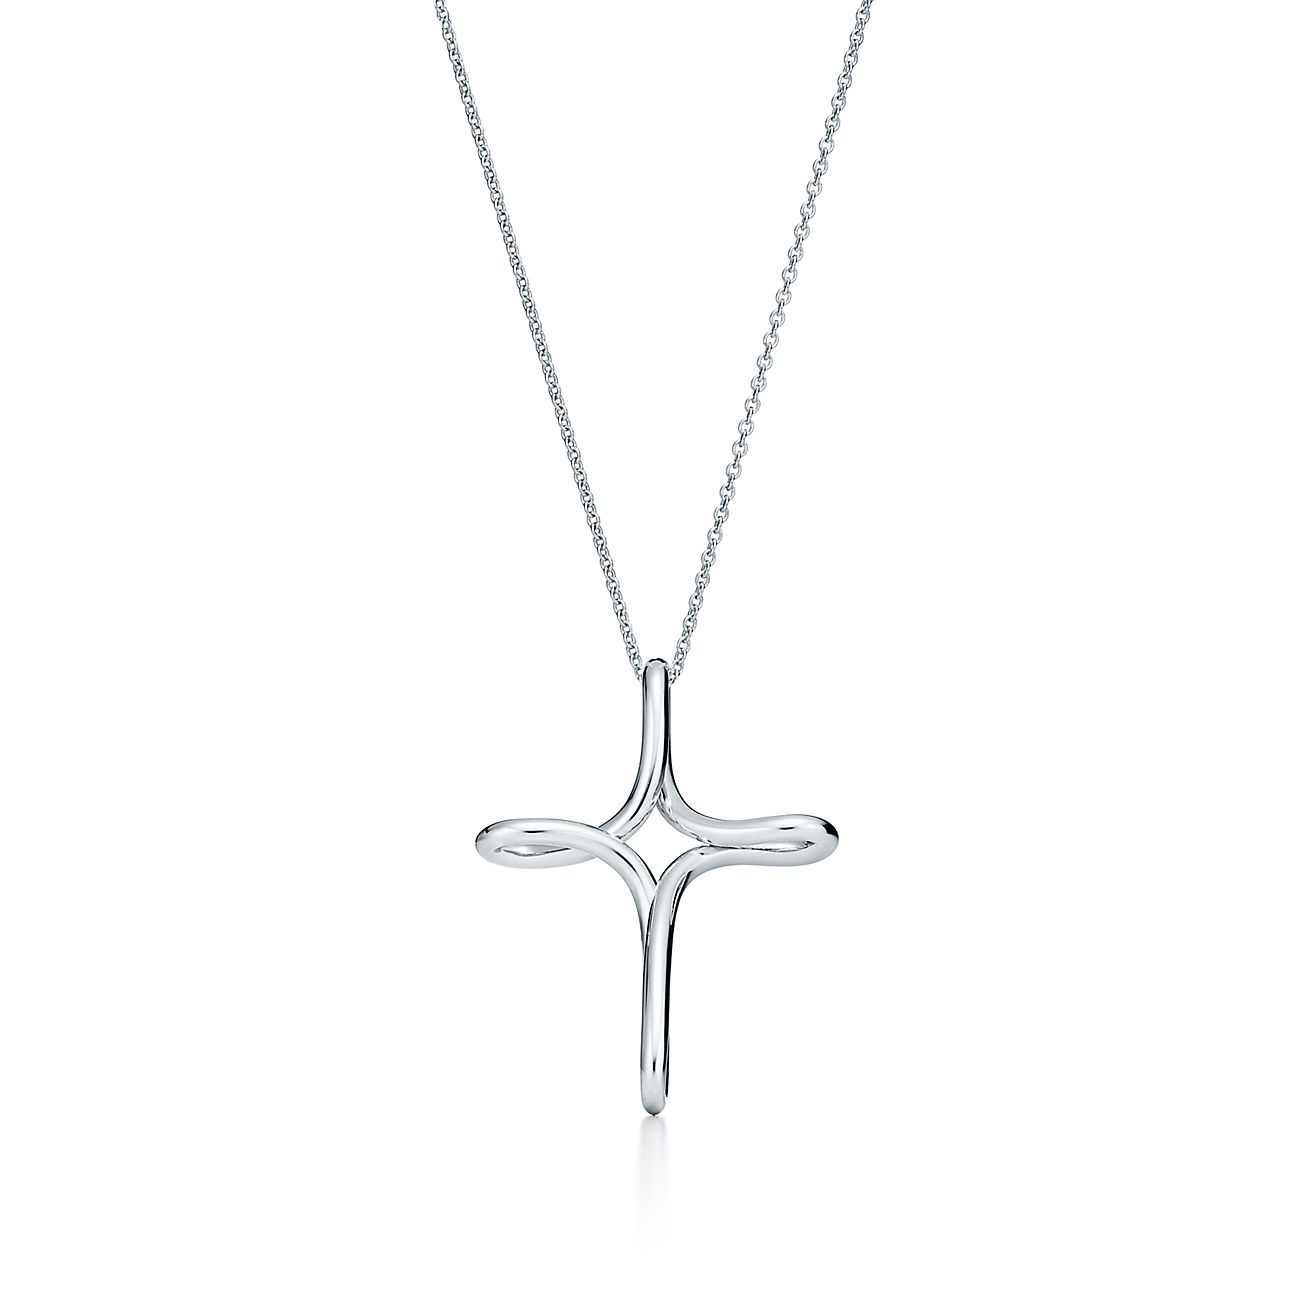 Tiffany Infinity Necklace in Sterling Silver